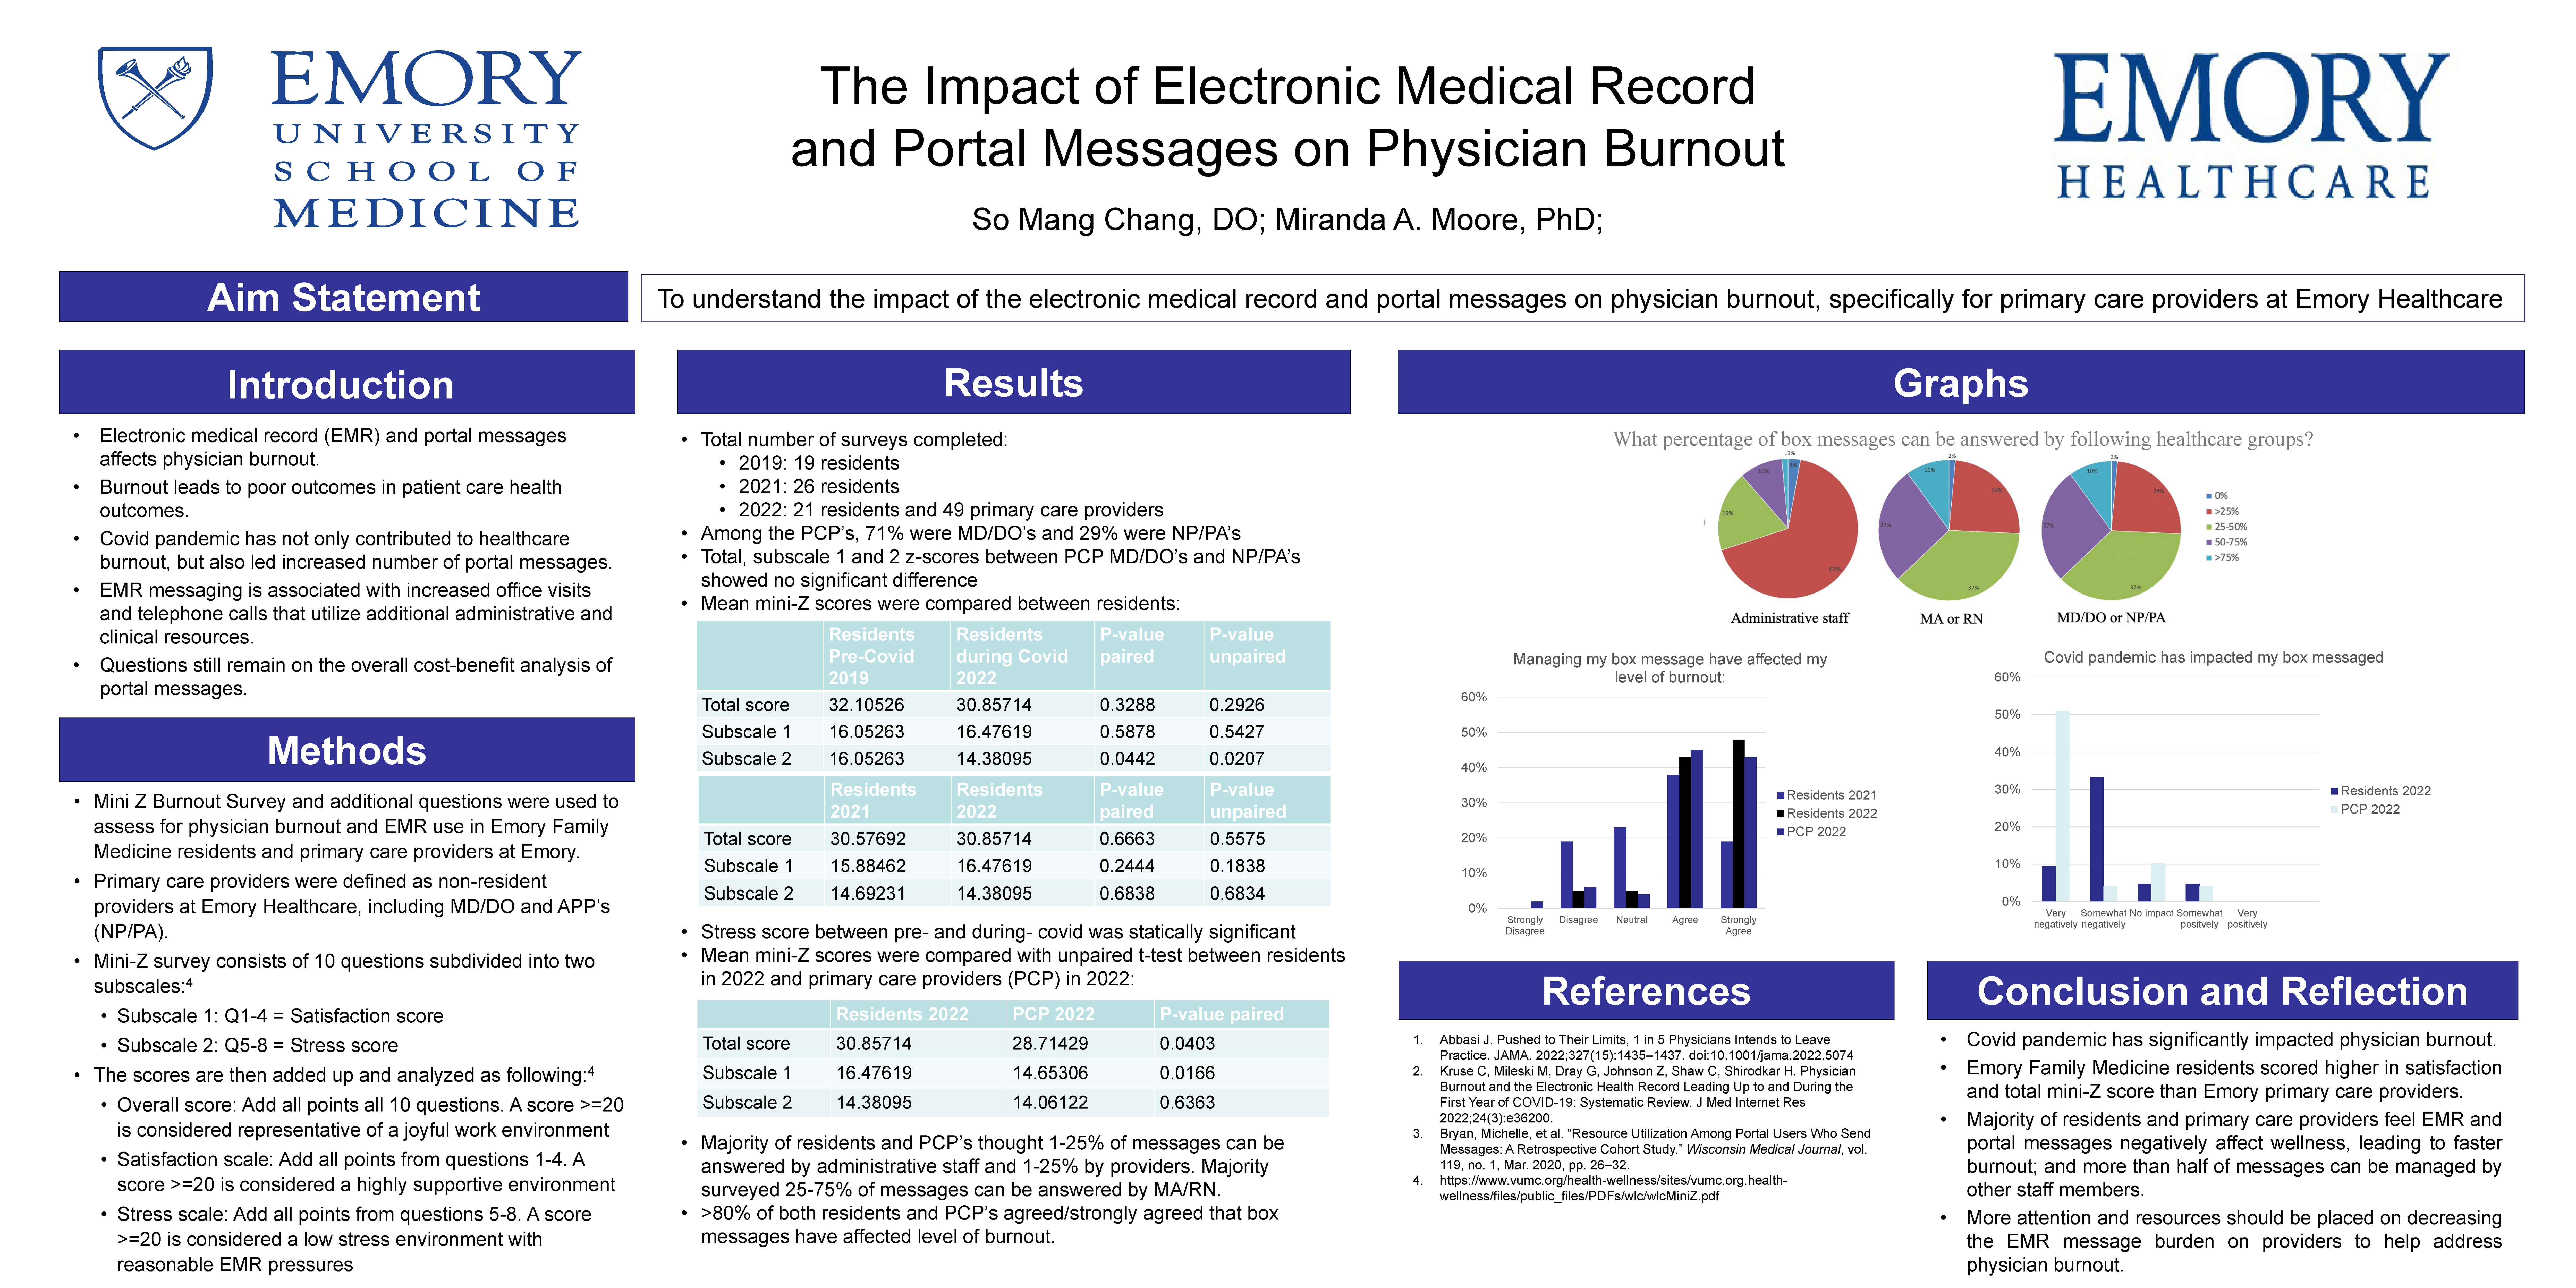 Survey results revealing that a majority of residents and primary care providers feel EMR and portal messages negatively affect wellness, leading to faster burnout; and more than half of messages can be managed by other staff members. 